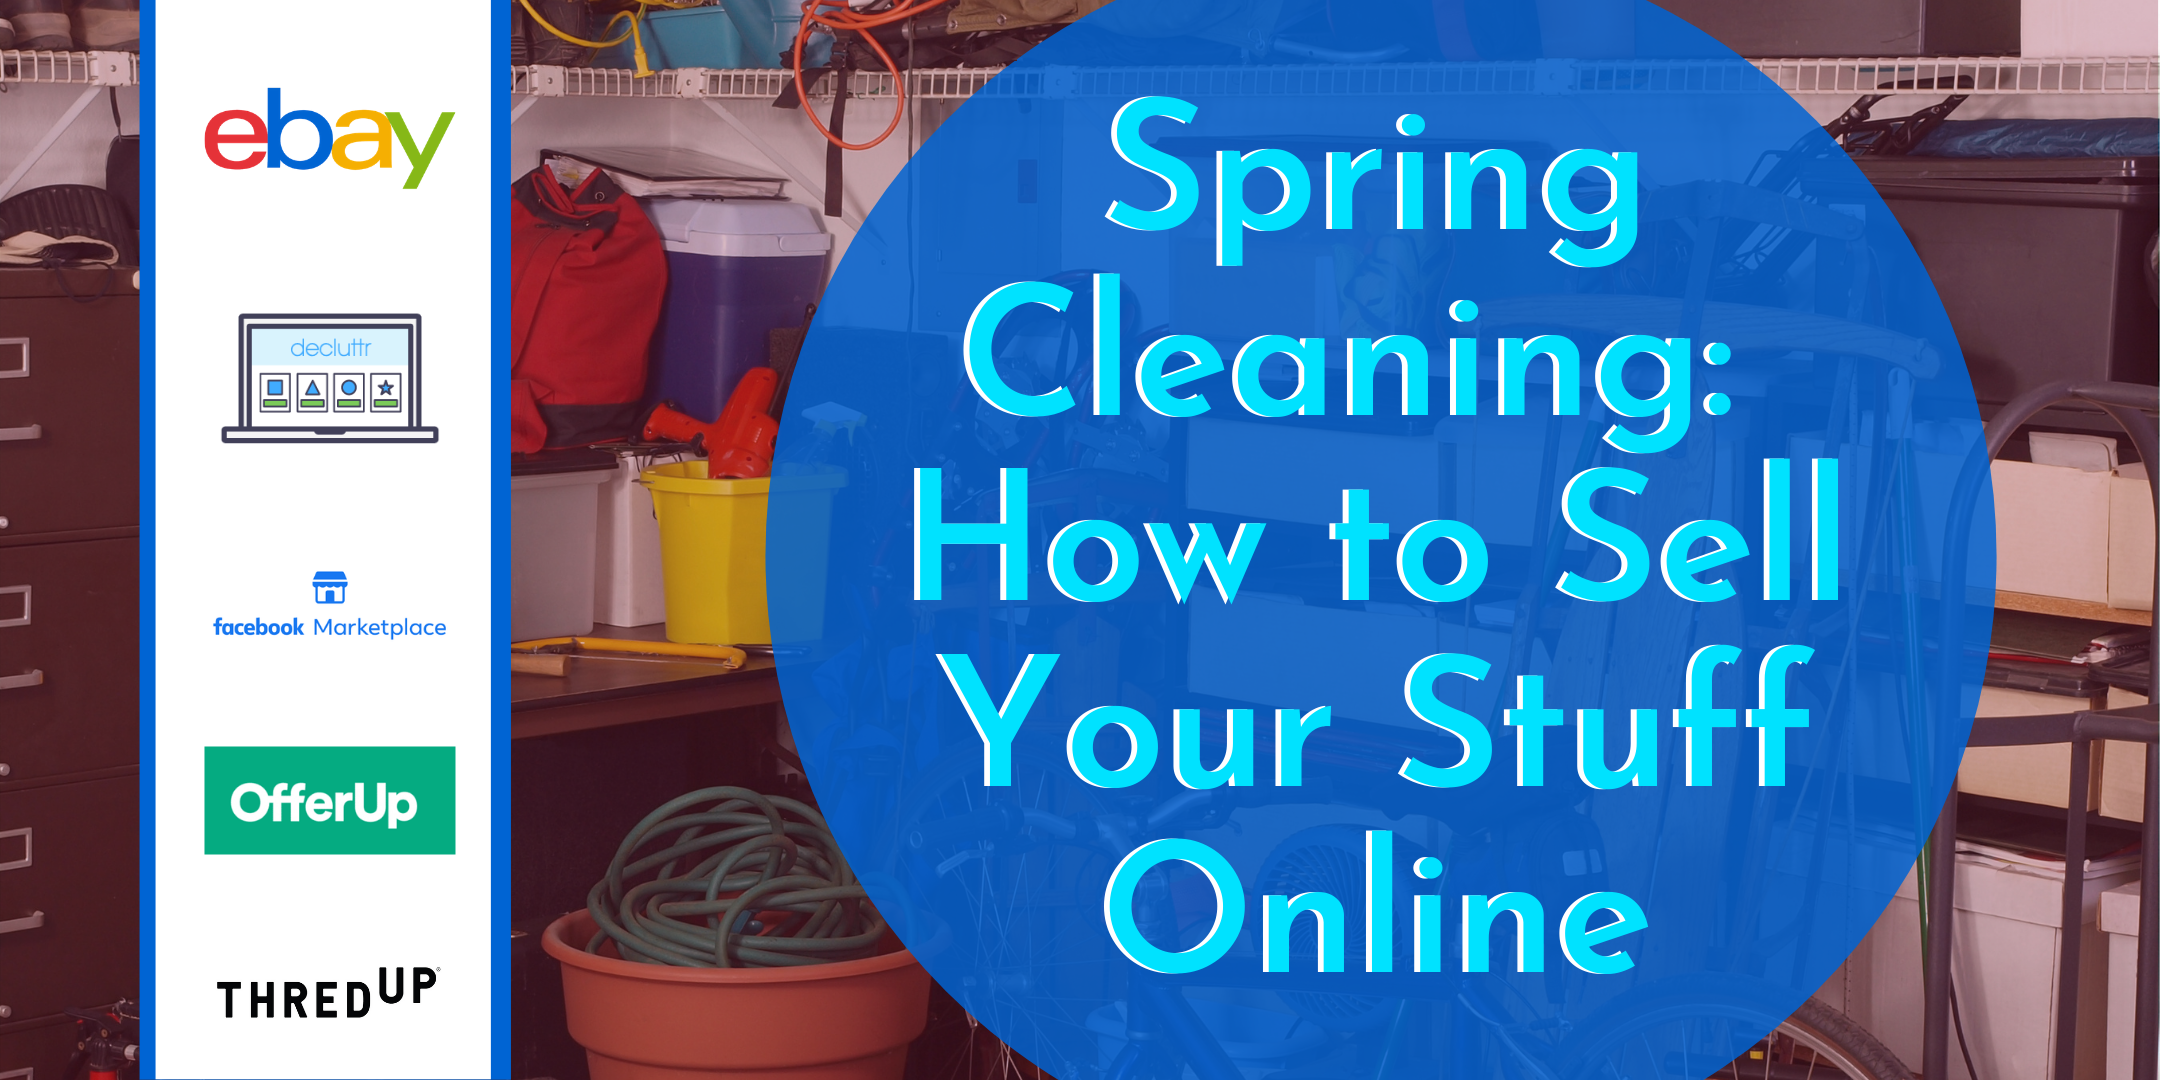 Spring Cleaning: How to Sell Your Stuff Online image